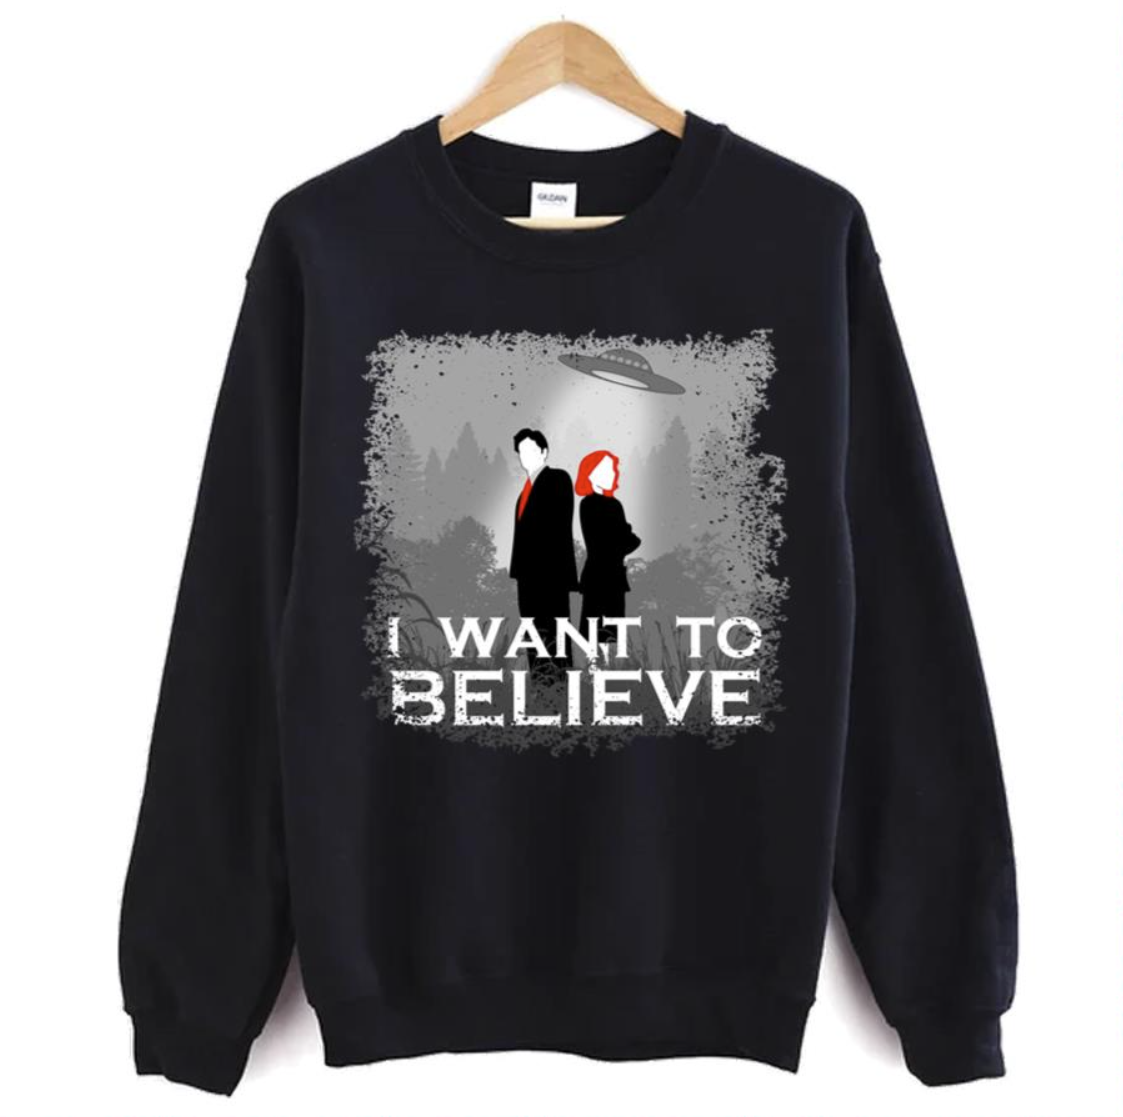 The Ufo I Want To Believe The X Files shirt